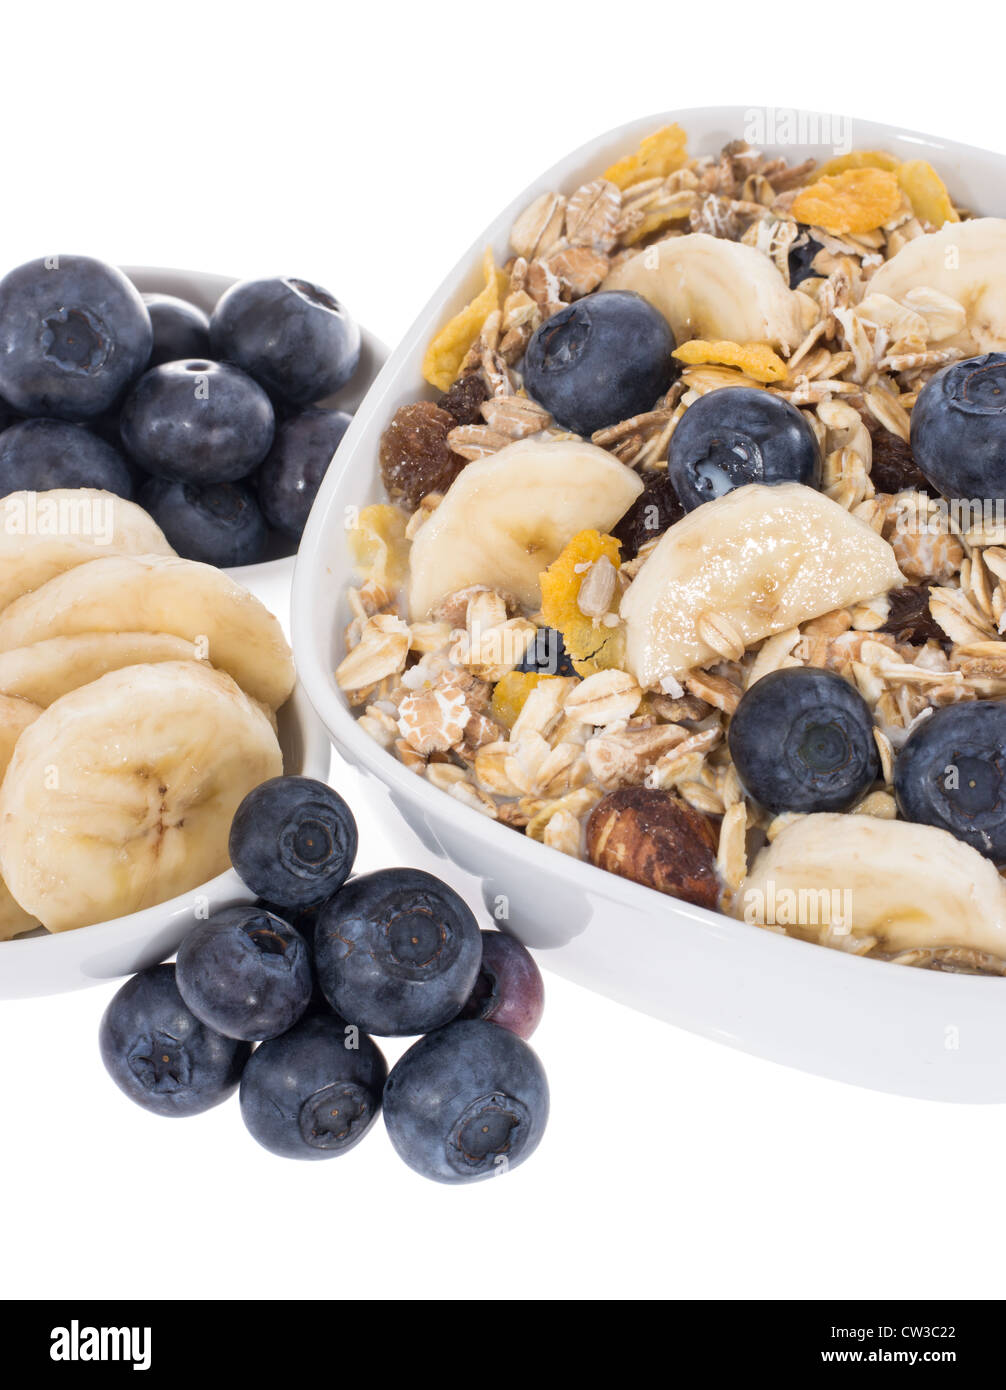 Mixed Muesli with Blueberries and Bananas isolated on white background Stock Photo